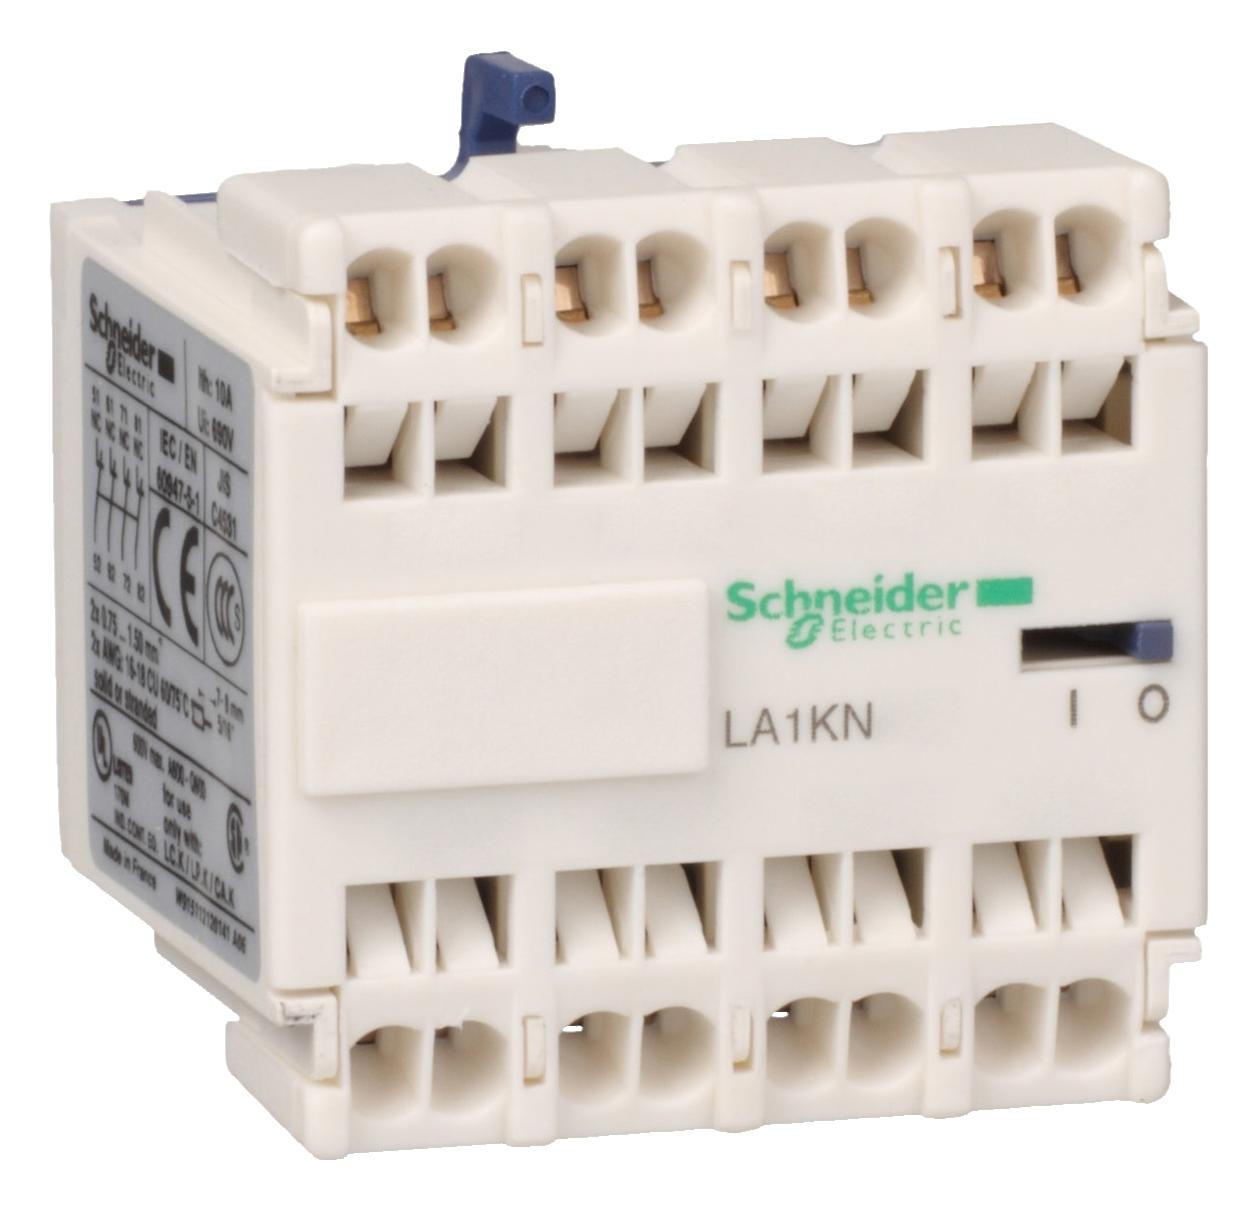 LA1KN313 AUXILIARY CONTACTS SCHNEIDER ELECTRIC